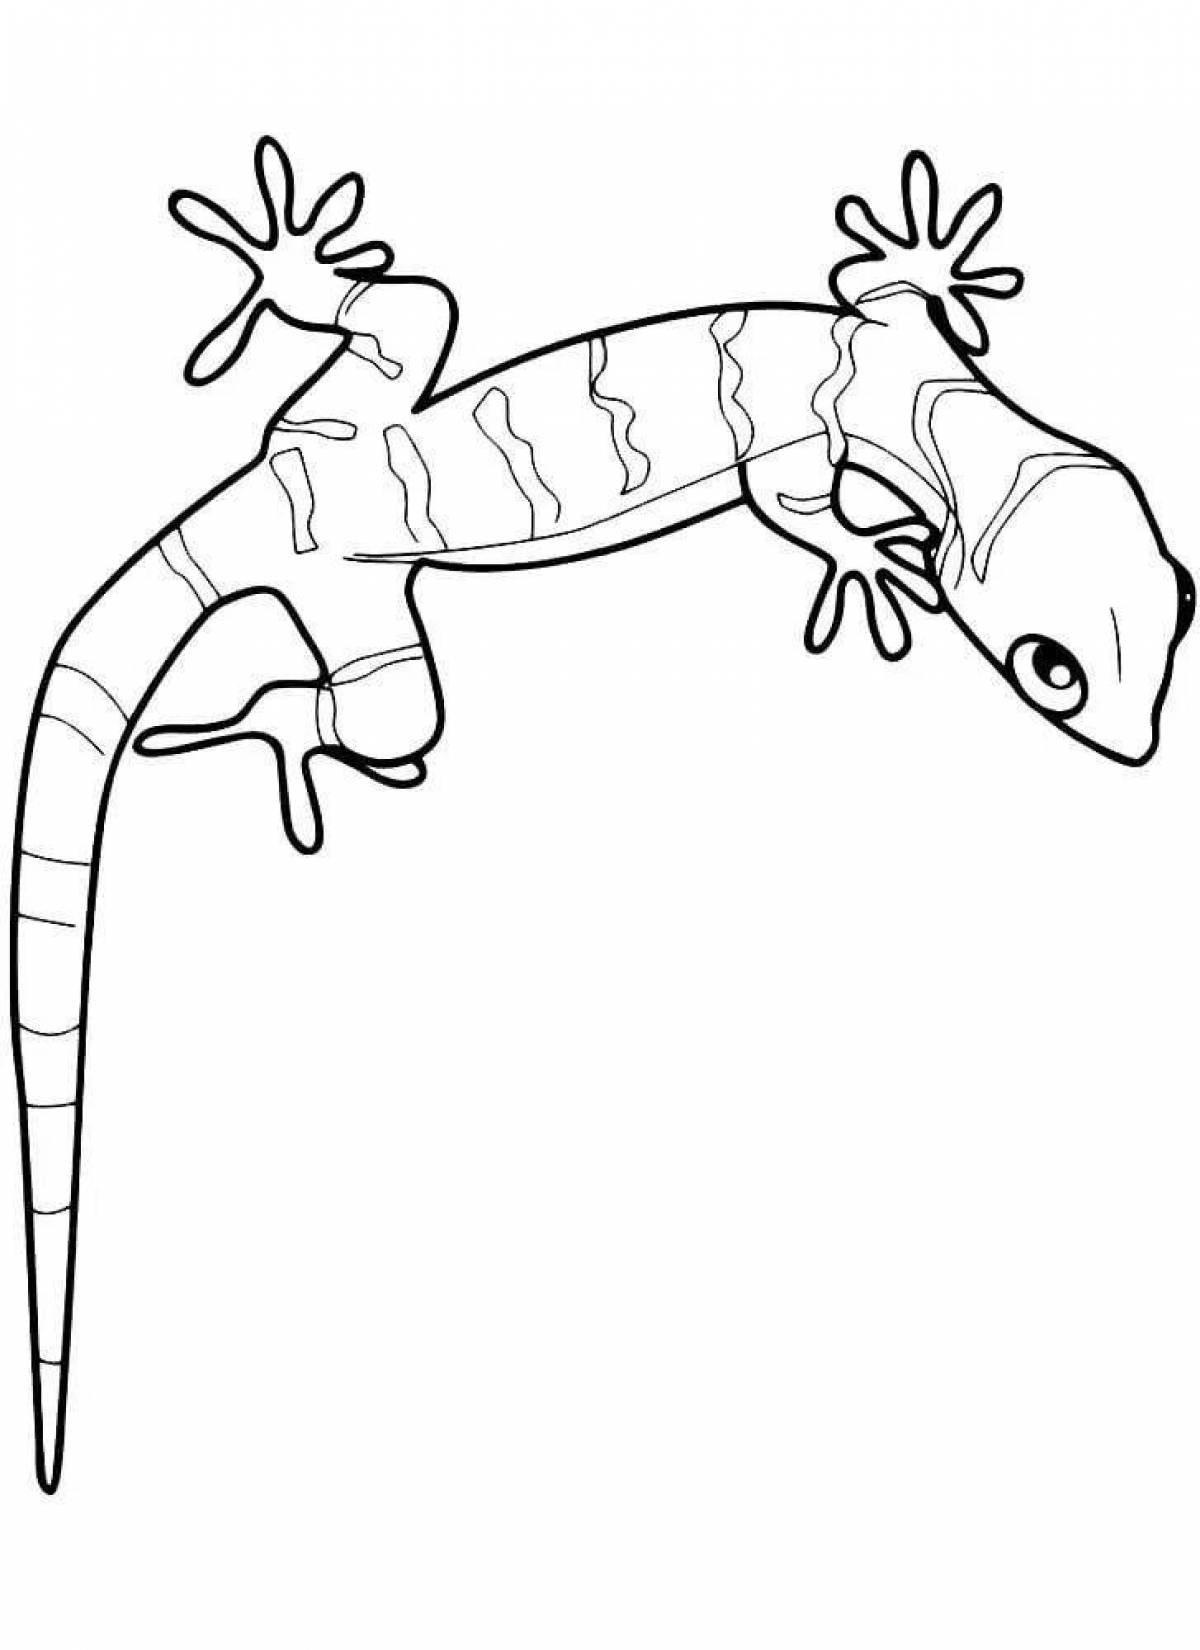 Exotic reptile coloring pages